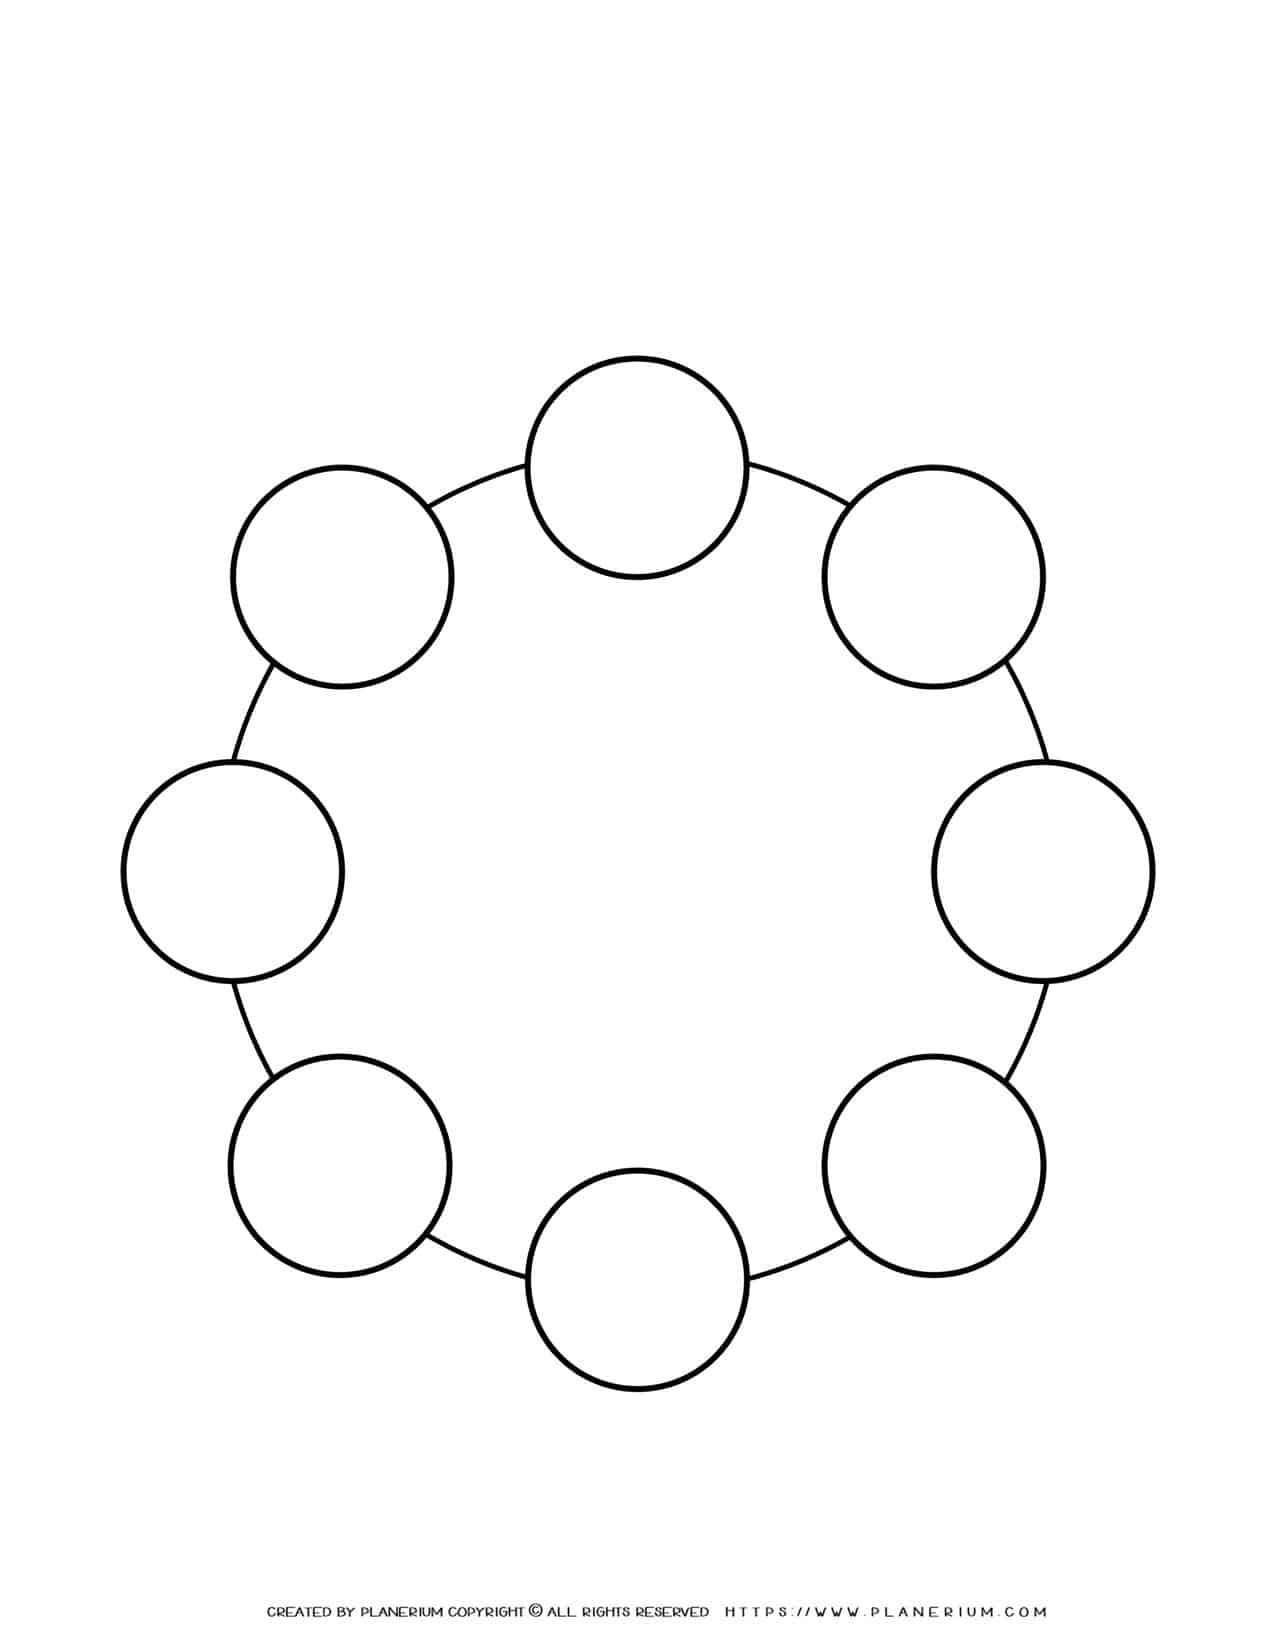 Sequence Chart Template - Eight Circles on a Circle | Planerium